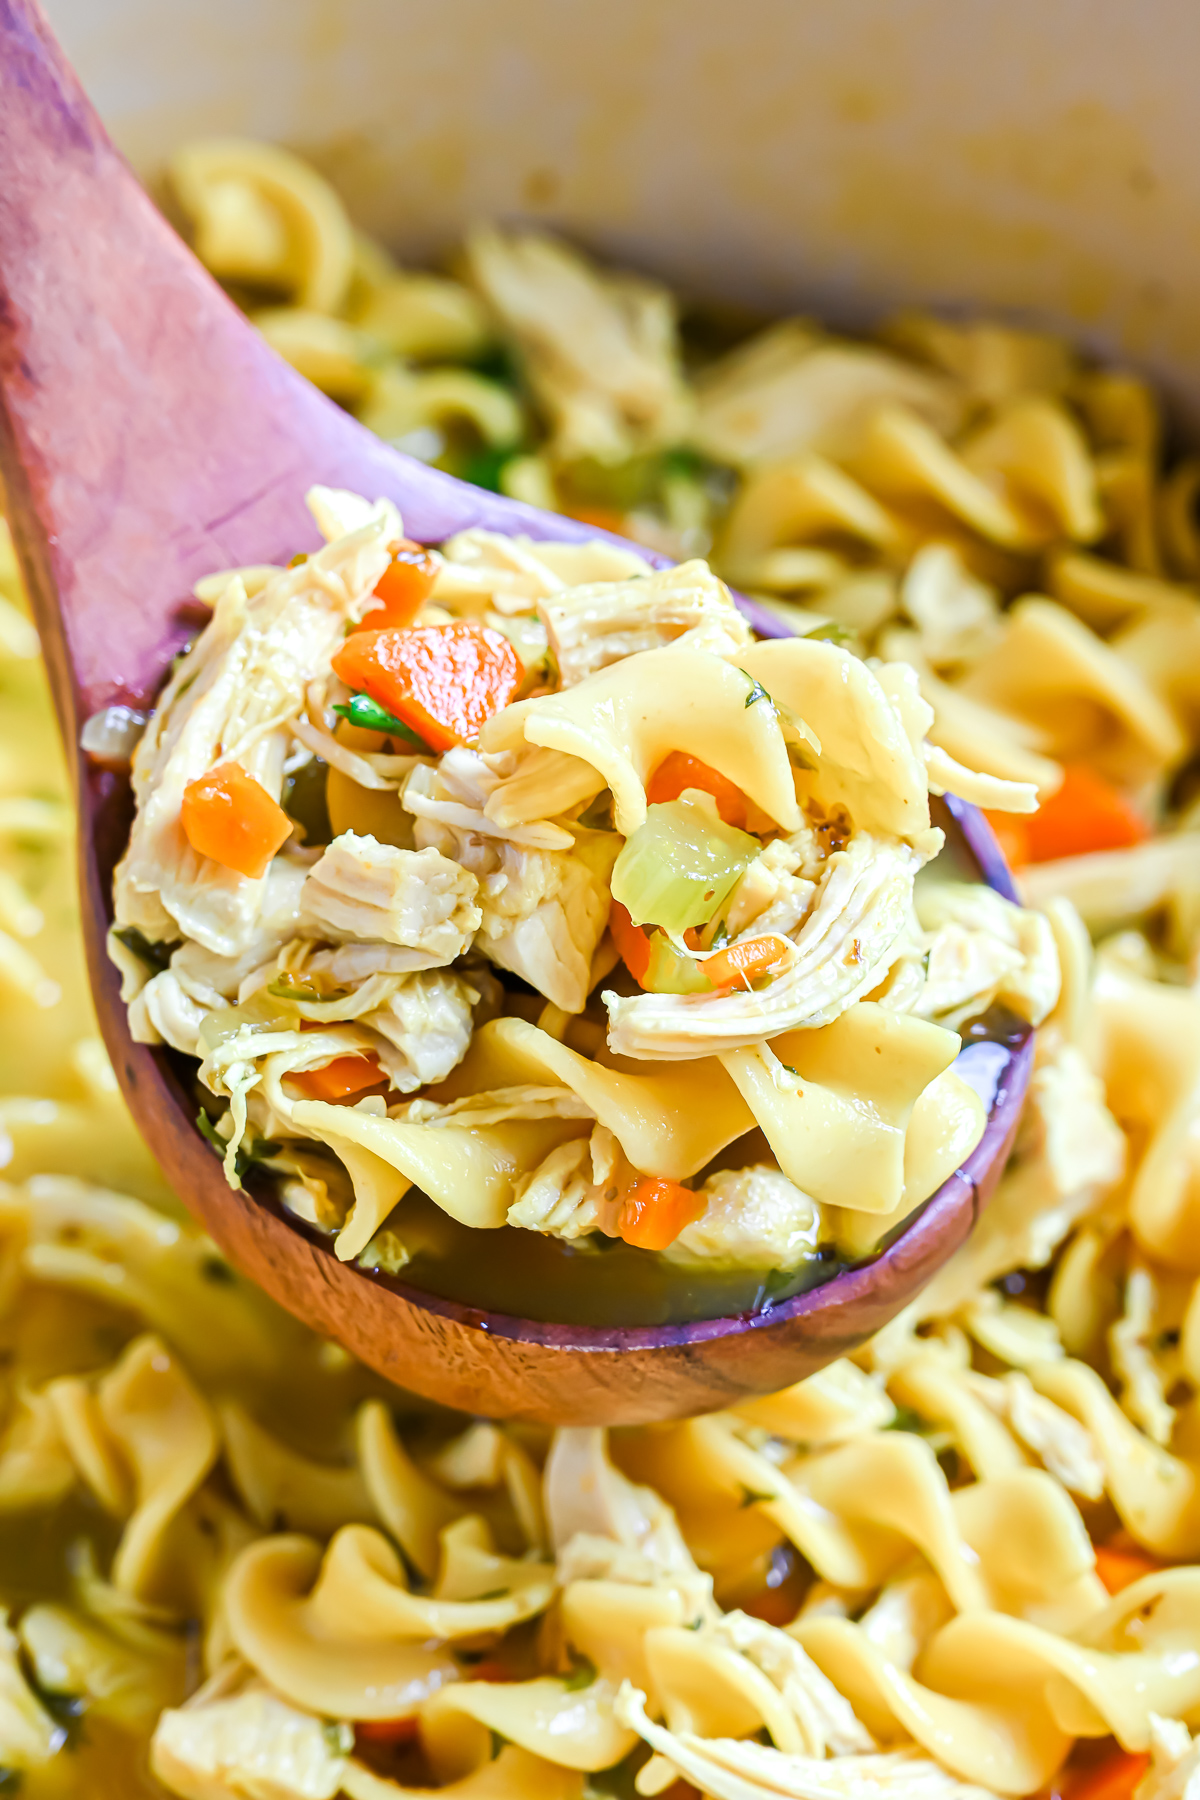 A large wooden ladle of Chicken Noodle Soup showing large, juicy chunks of chicken breast, tender egg noodles, and pieces of celery, carrots and onions.